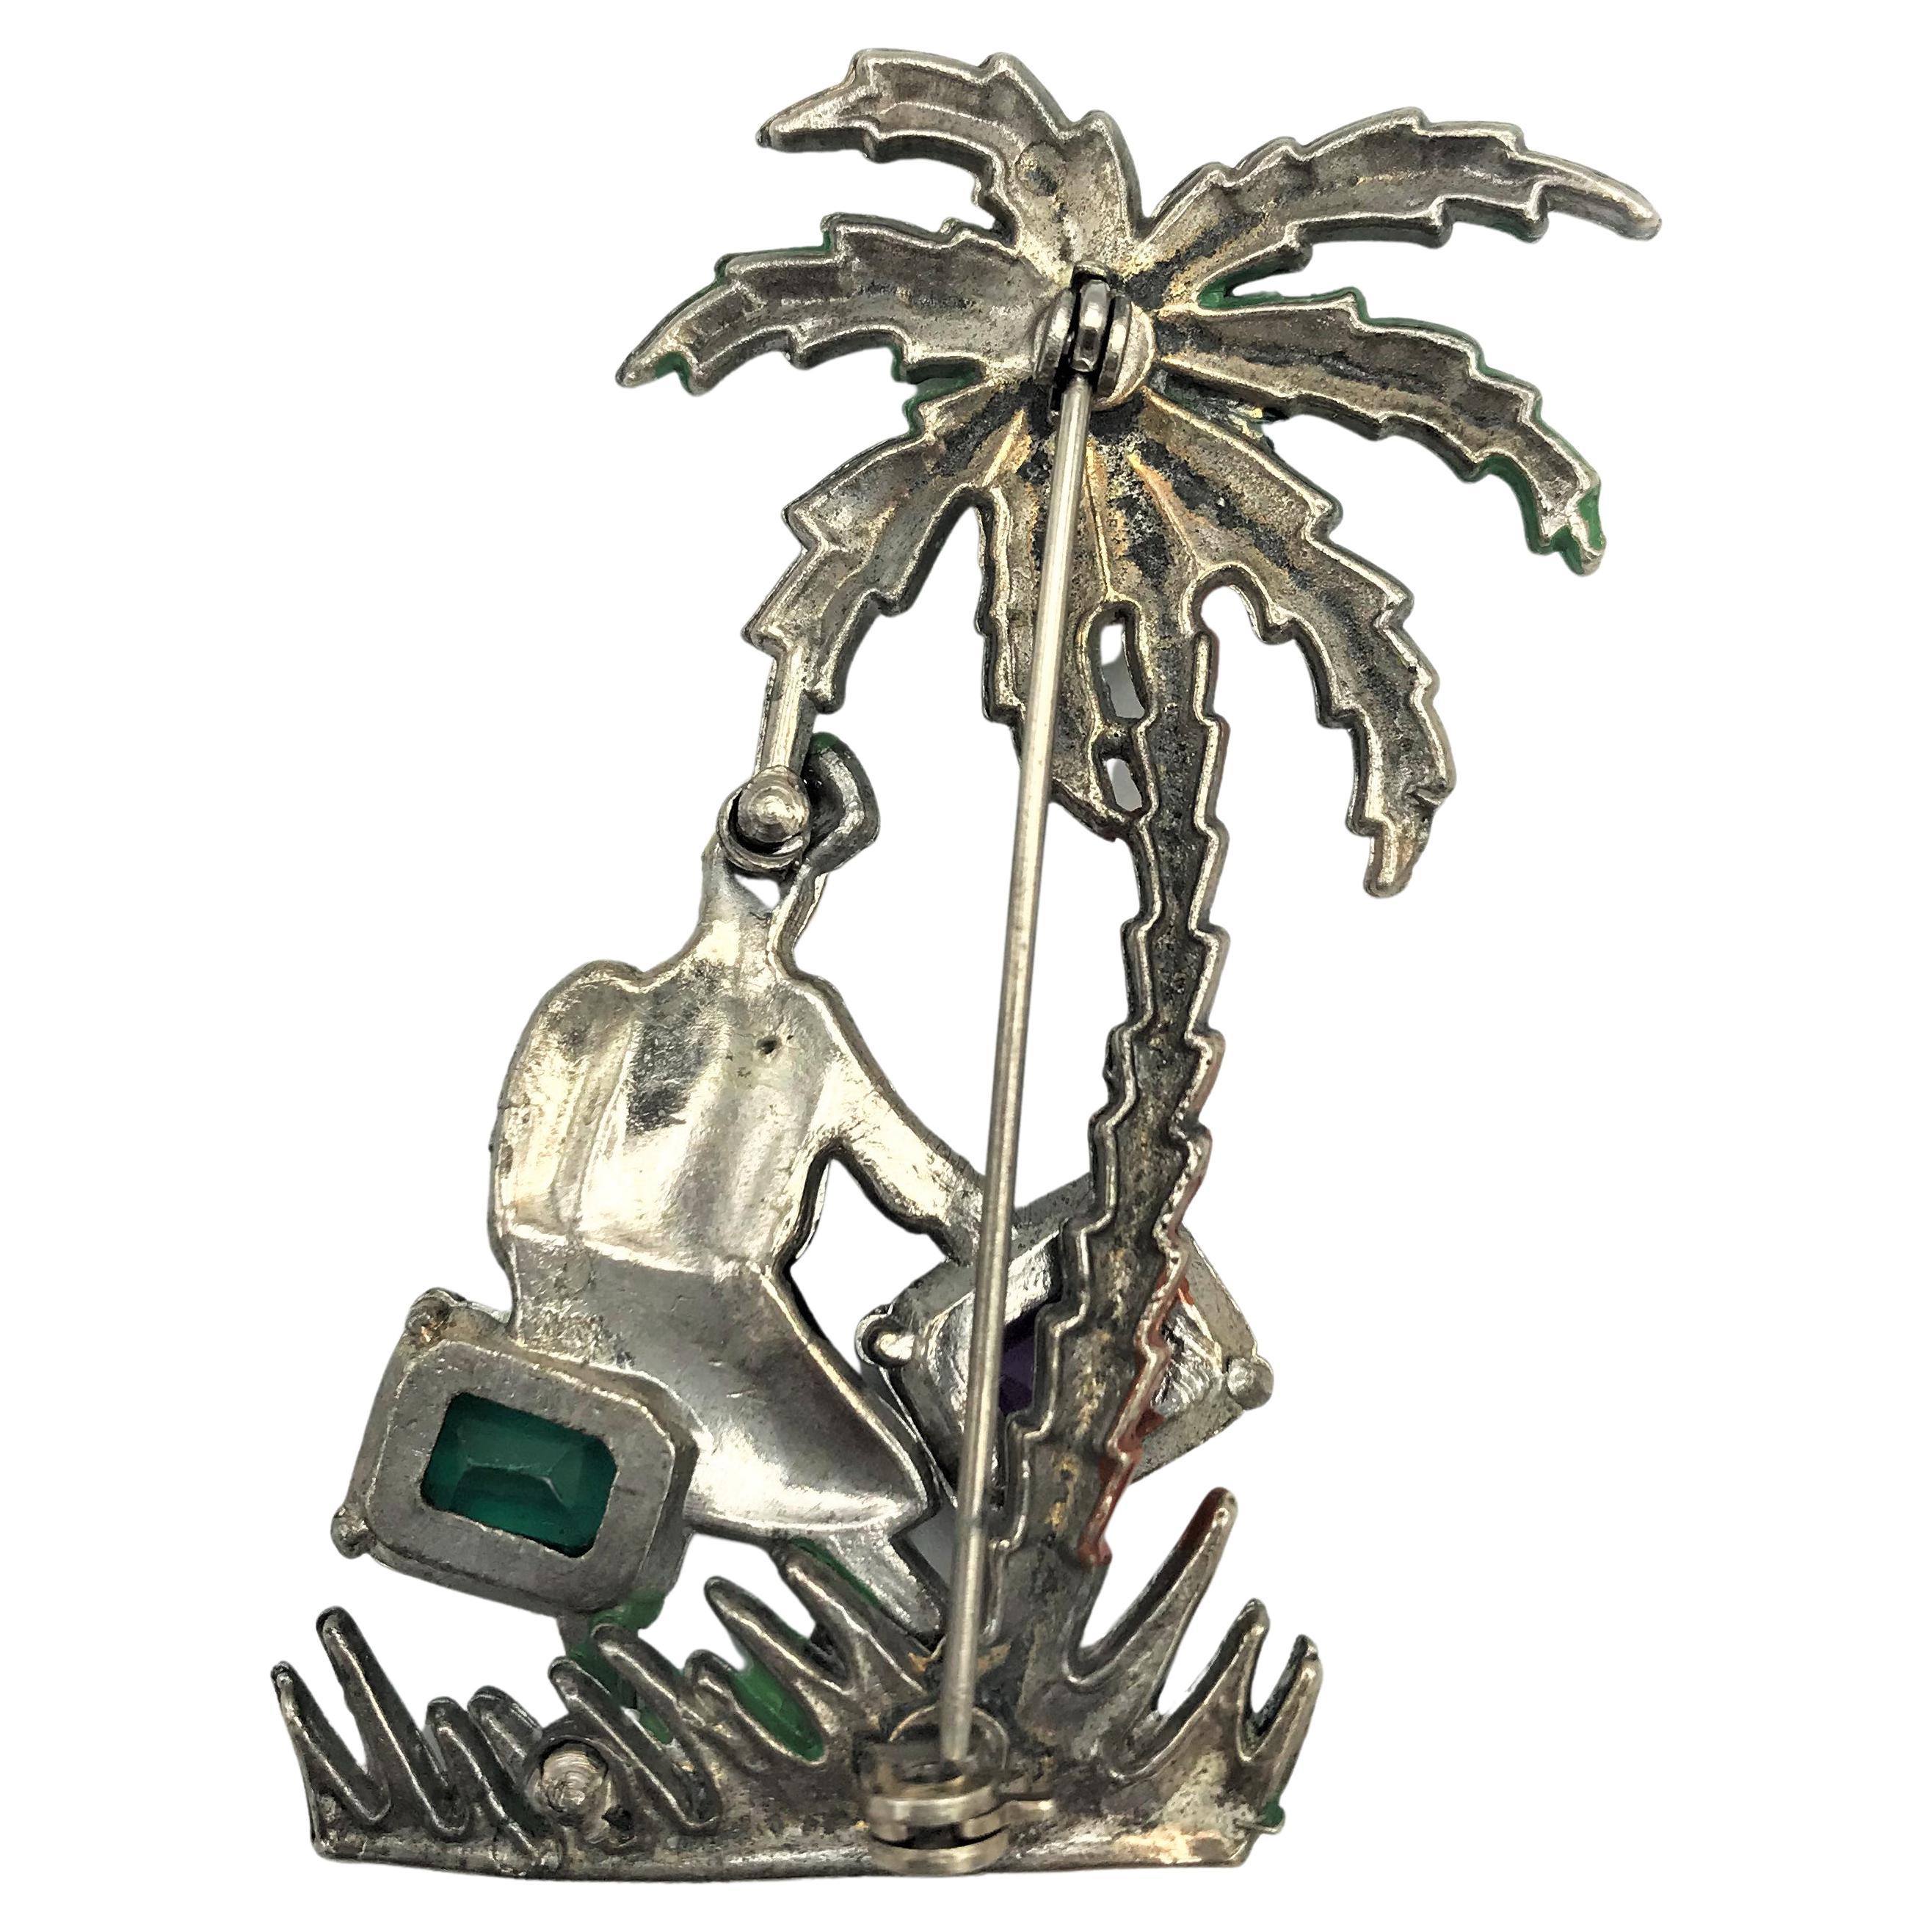 Superb Baumann Massa suitcase lady under a spreading palm tree brooch.
The suitcase is set with faceted rhinestones( they are the suitcase), one pink and one green.
She is stepping through the enameled grass under a large palm tree.
She is in great